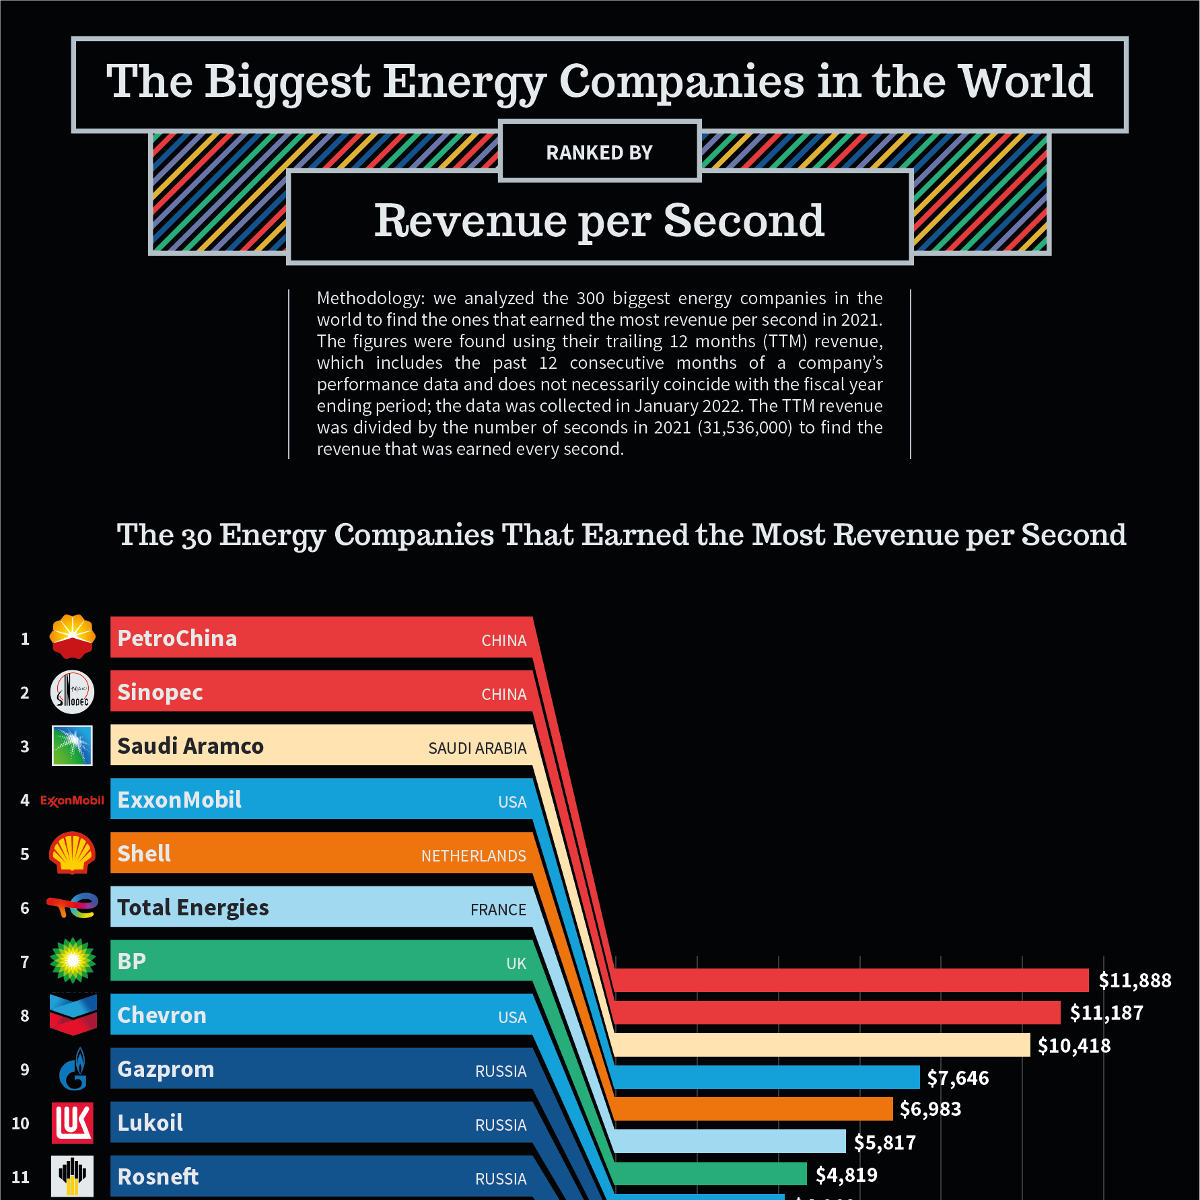 the-biggest-energy-companies-in-the-world-ranked-by-revenue-per-second